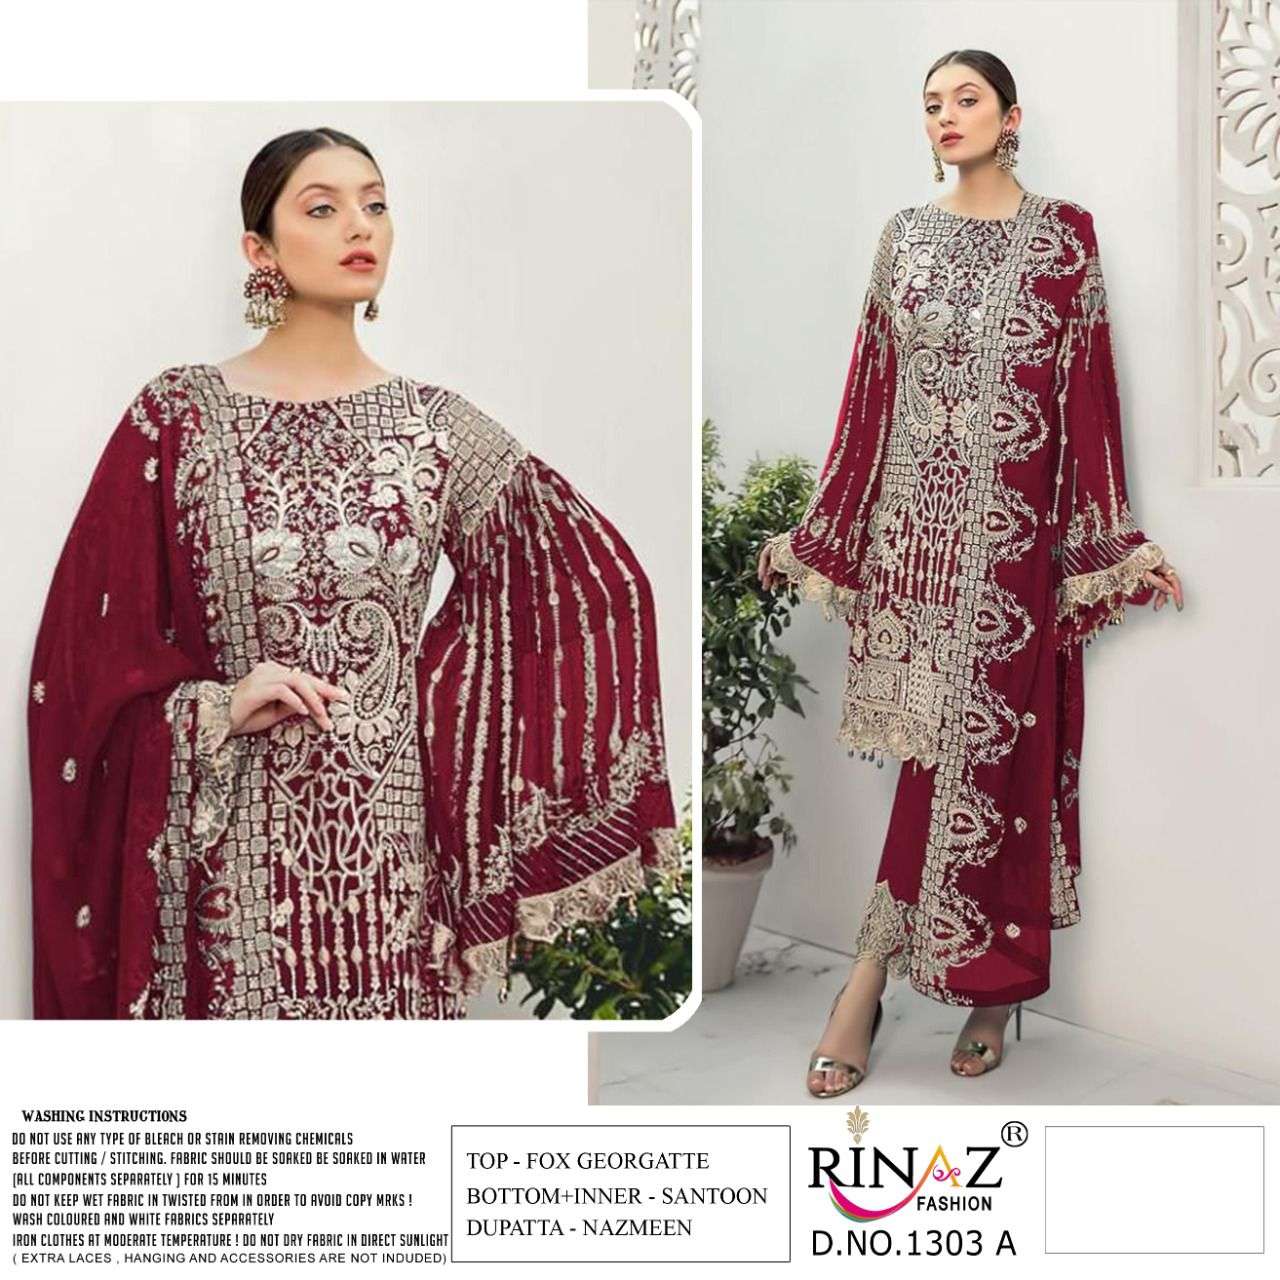 Rinaz Fashion Present Rinaz D.no 1303 A To 1303 D Series Georgette Pakistani Salwar Suits In Wholesale Price At Saidharanx